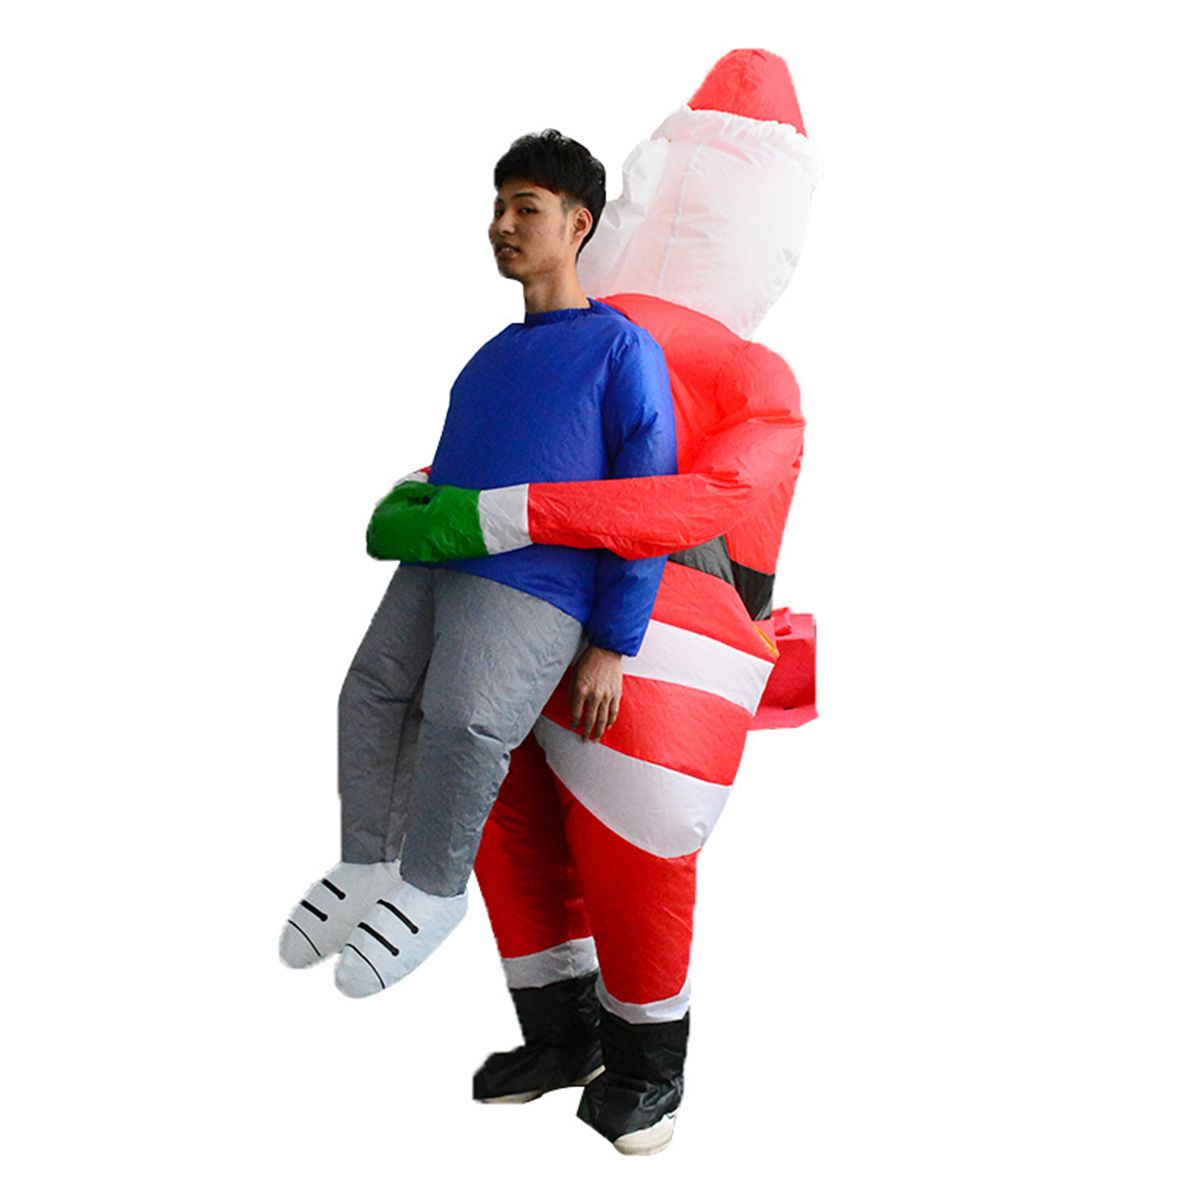 Scary-Halloween-Christmas-Man-Inflatable-Costume-Blow-Up-Suits-Party-Dress-Decorations-1565297